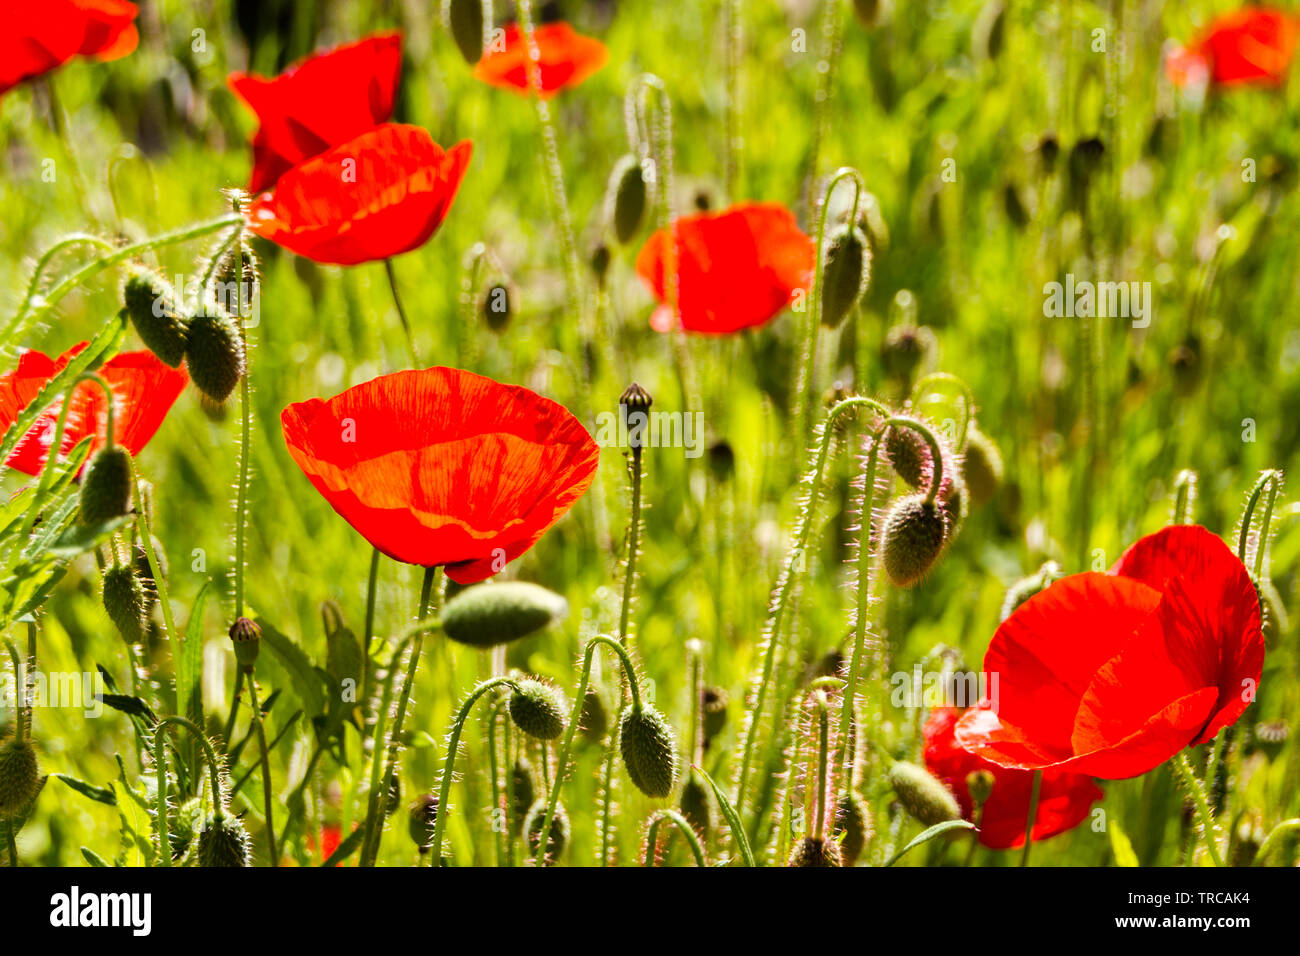 Field with red Common Poppy (Papaver rhoeas), of the poppy family Papaveraceae. The poppy is also a symbol of dead soldiers since World War 1. Stock Photo